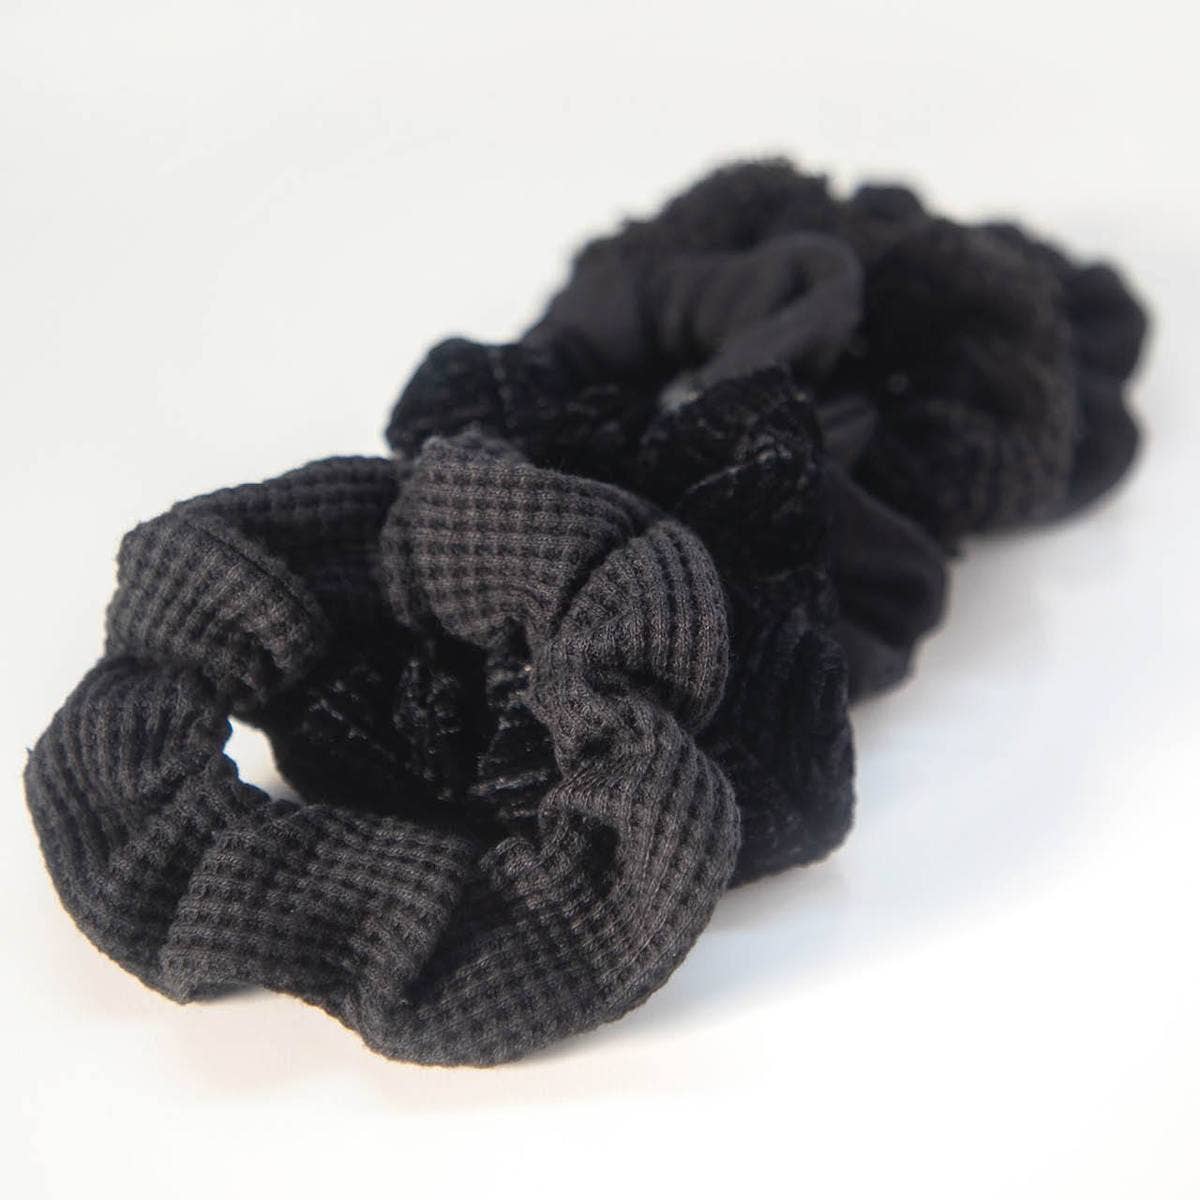 Black Assorted Textured Scrunchies 5 pack